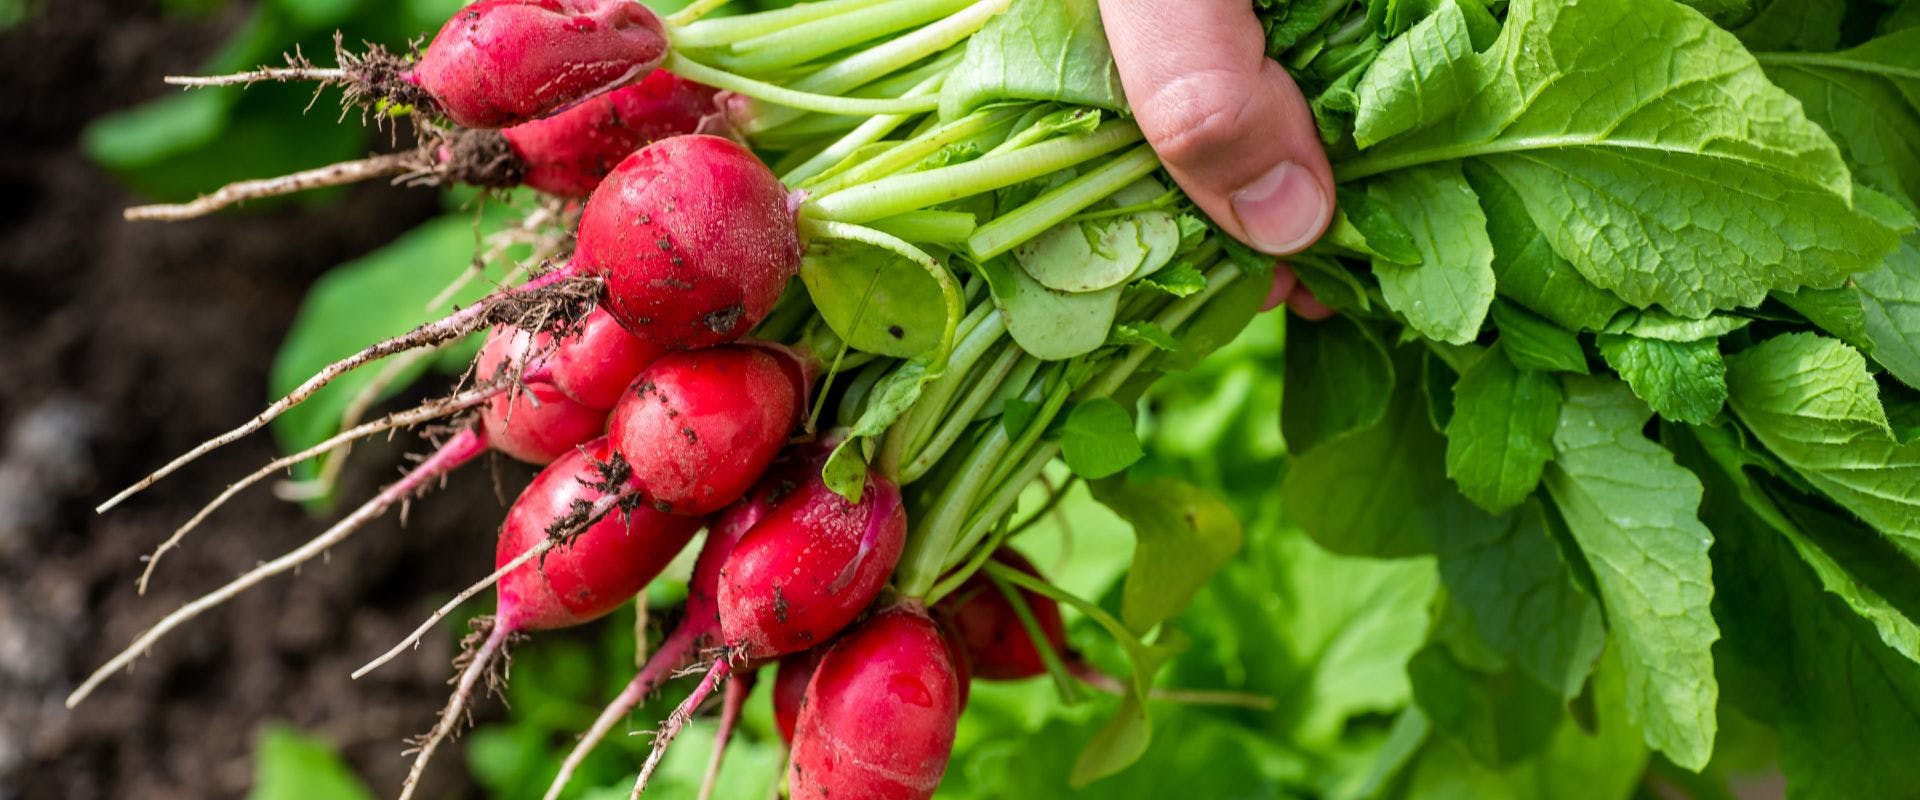 A bunch of freshly picked radishes being held